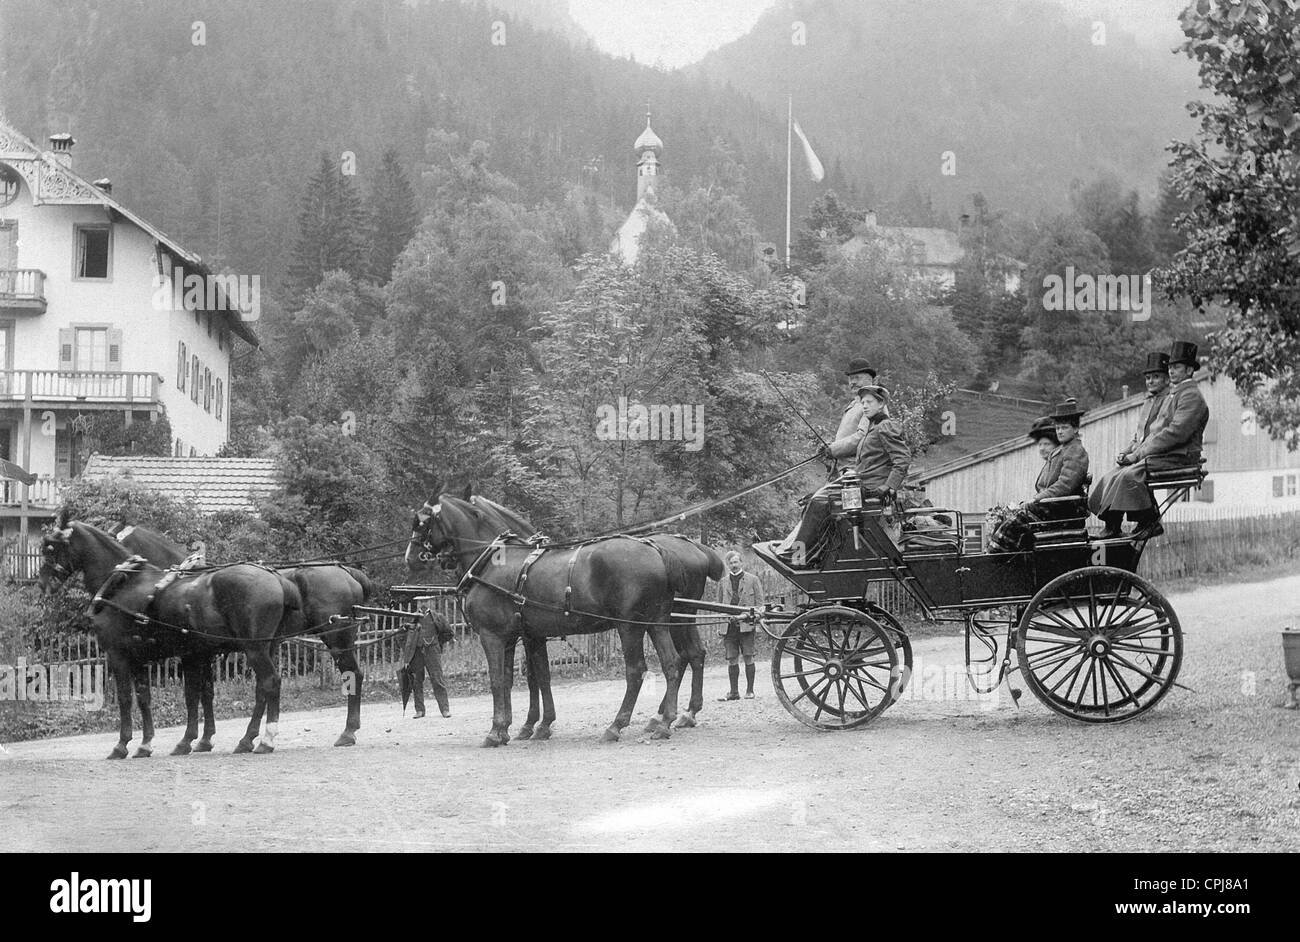 Members of the Bavarian royal family during a trip, 1908 Stock Photo